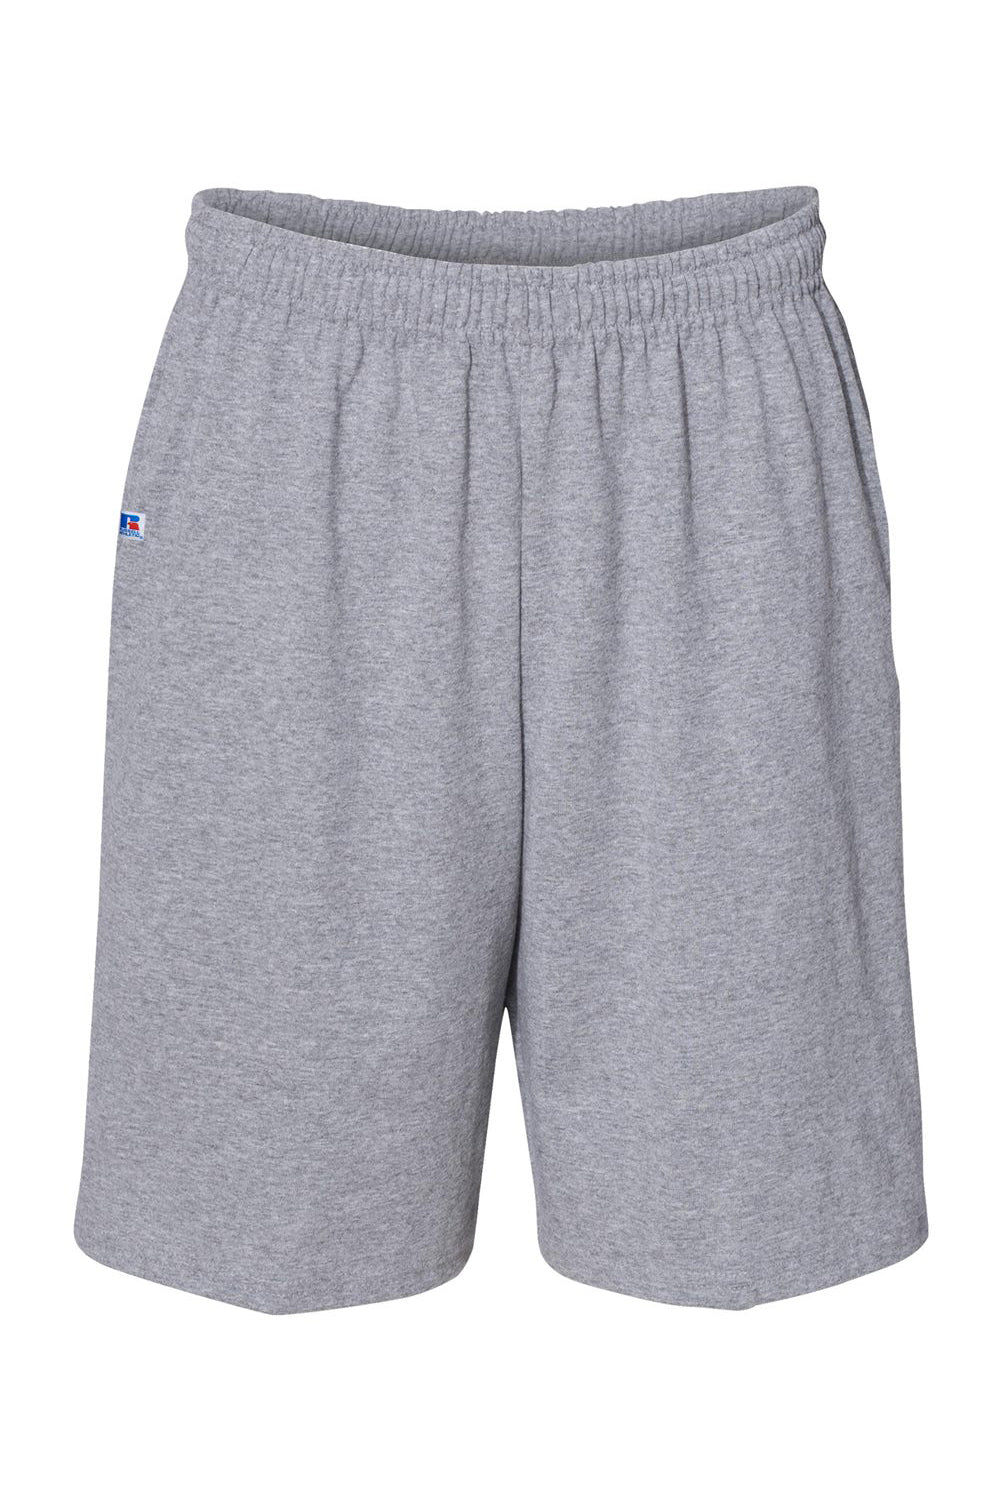 Russell Athletic 25843M Mens Classic Jersey Shorts w/ Pockets Oxford Grey Flat Front